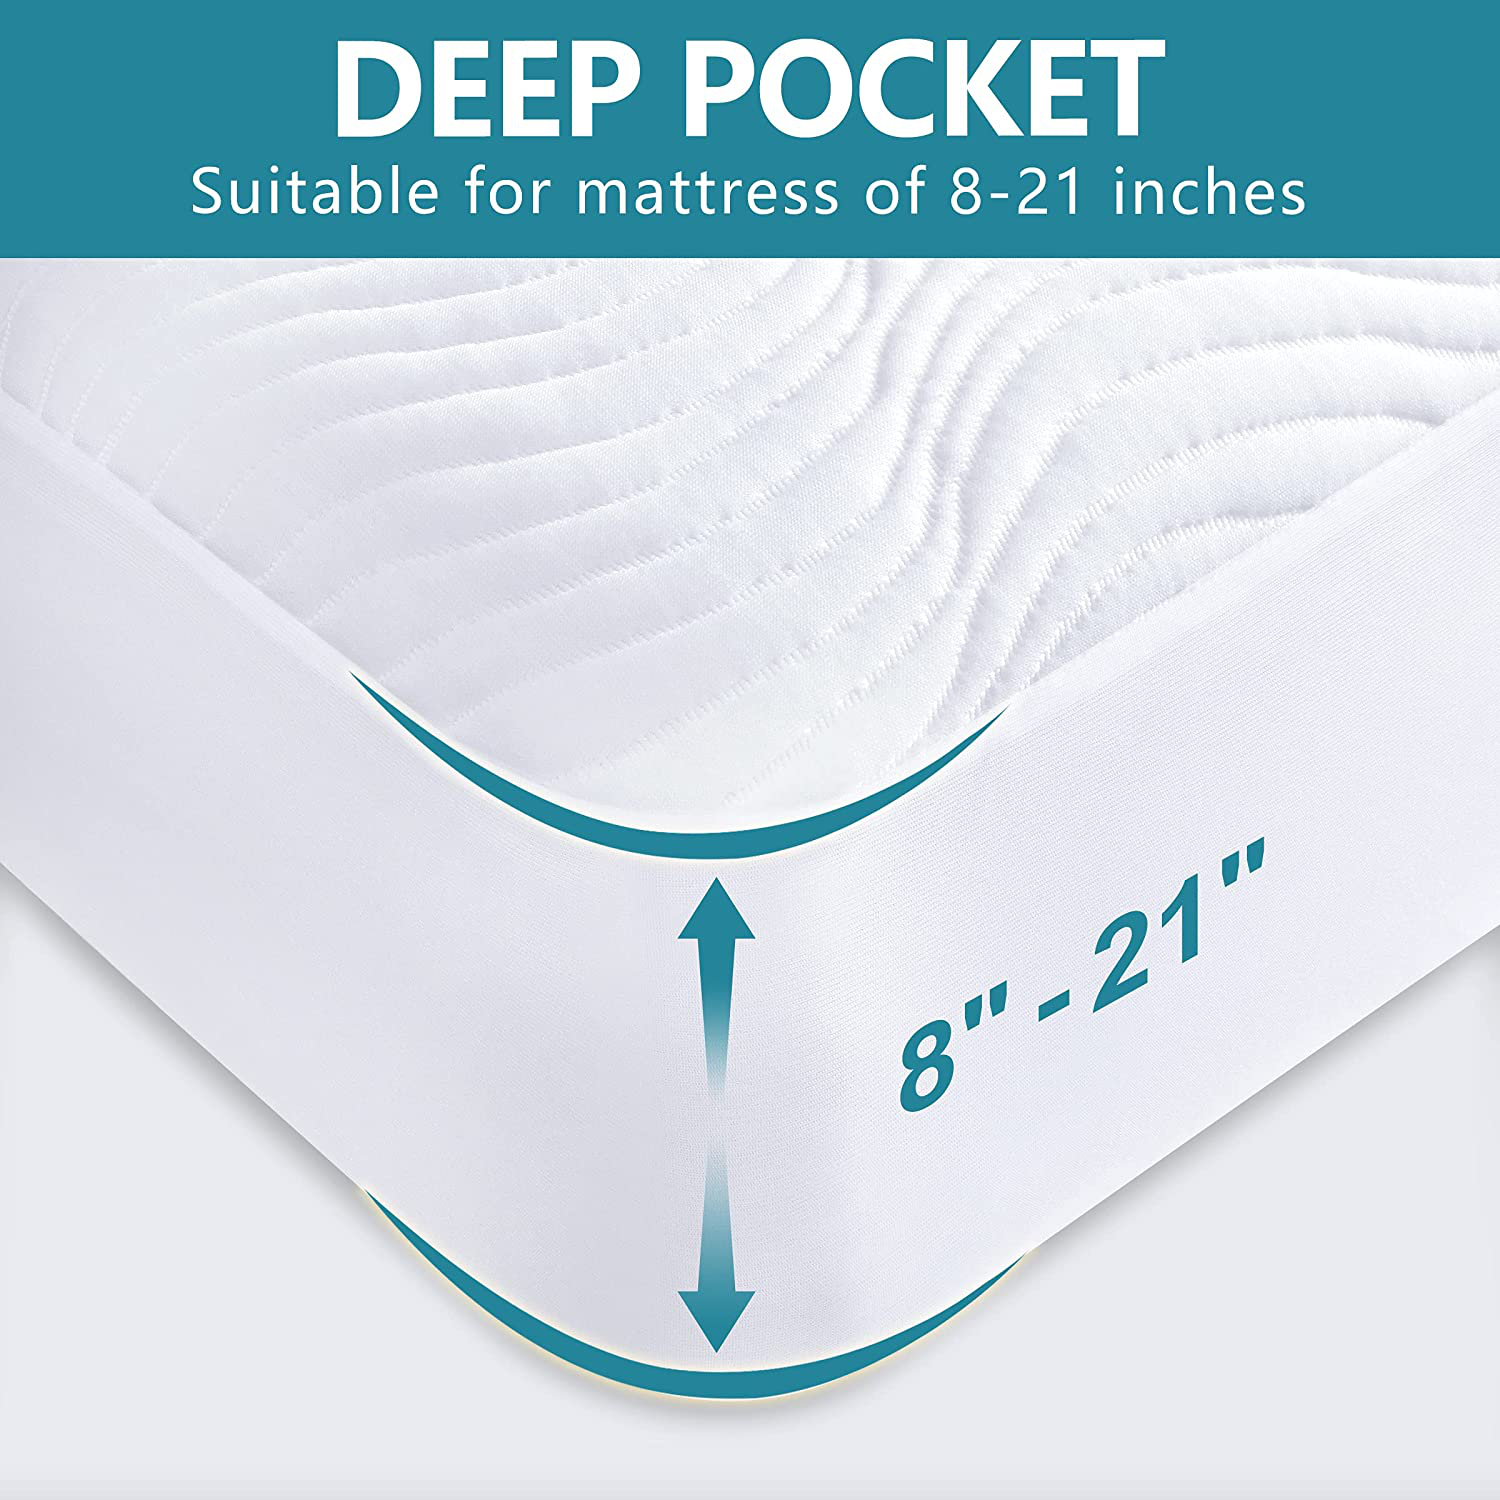 SINSAY Twin XL Size Waterproof Mattress Protector, Breathable Ultra-Soft & Noiseless Protector Cover, Stretchable Deep Pocket Fits Up to 21" Mattress Pad, Easy to Clean Machine-Wash Mattress Cover